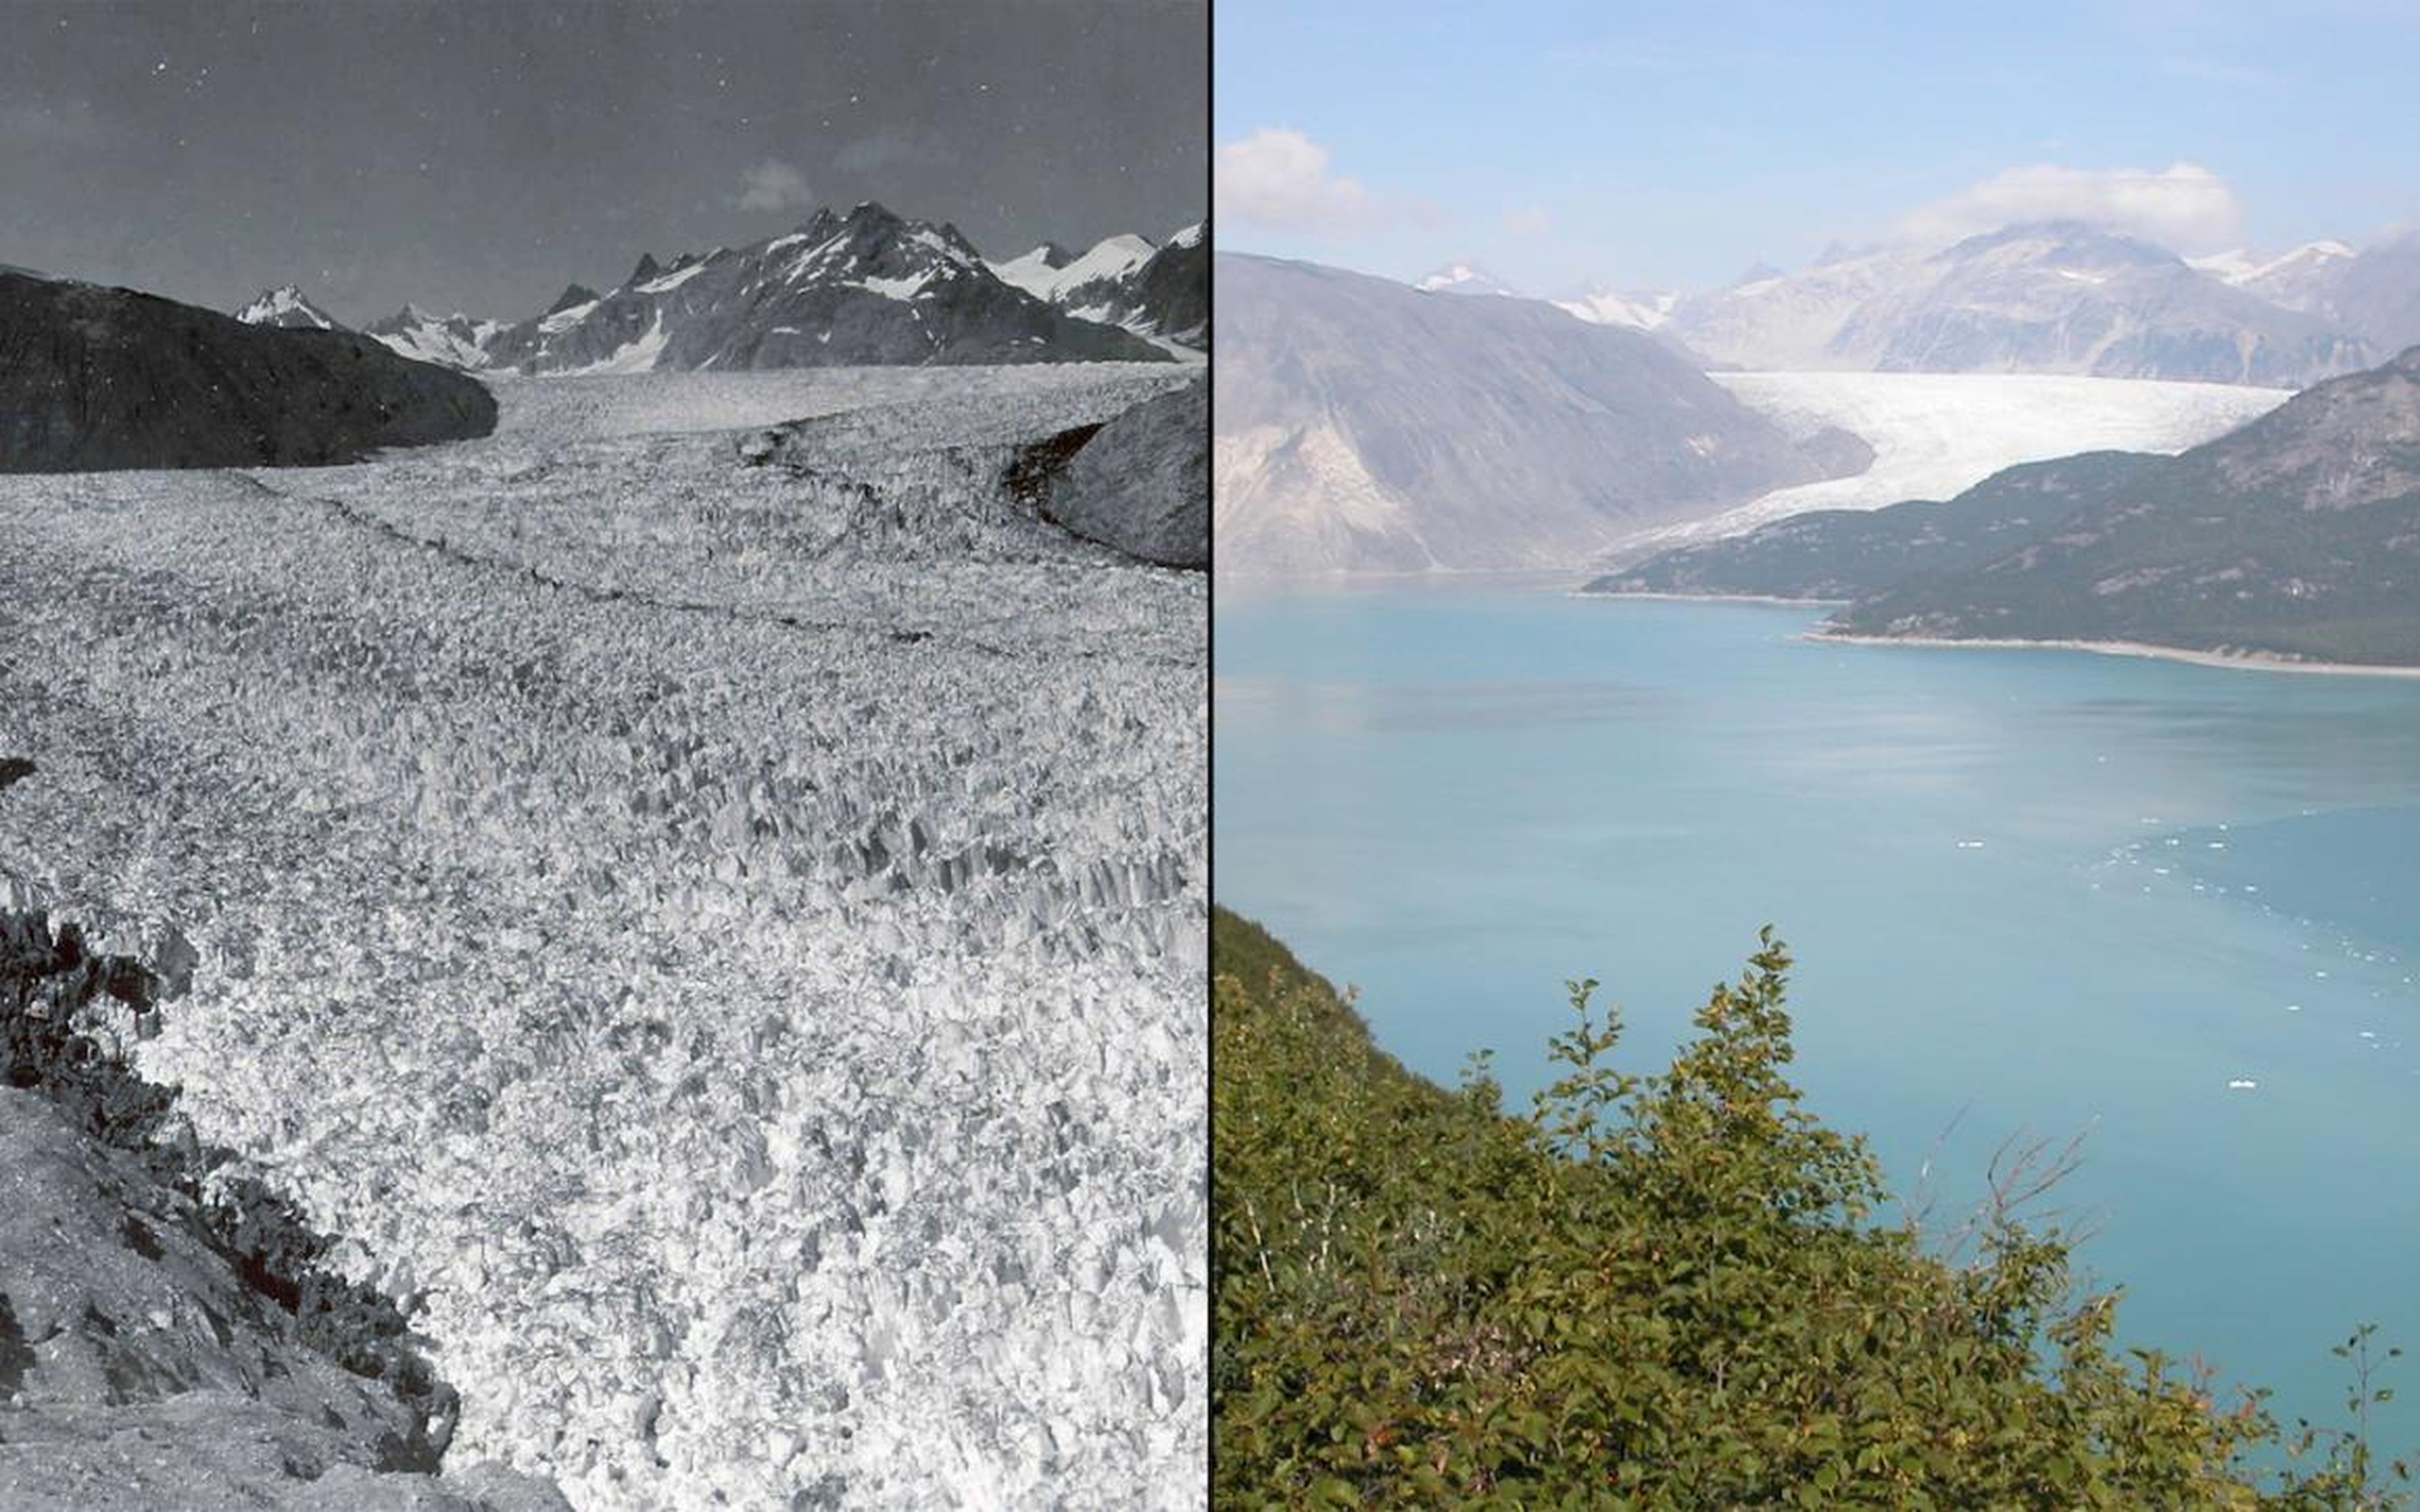 Melting glaciers are some of the most visually dramatic effects of a warming planet. Here's Alaska's Muir Glacier as pictured in August 1941 (left) and August 2004 (right).